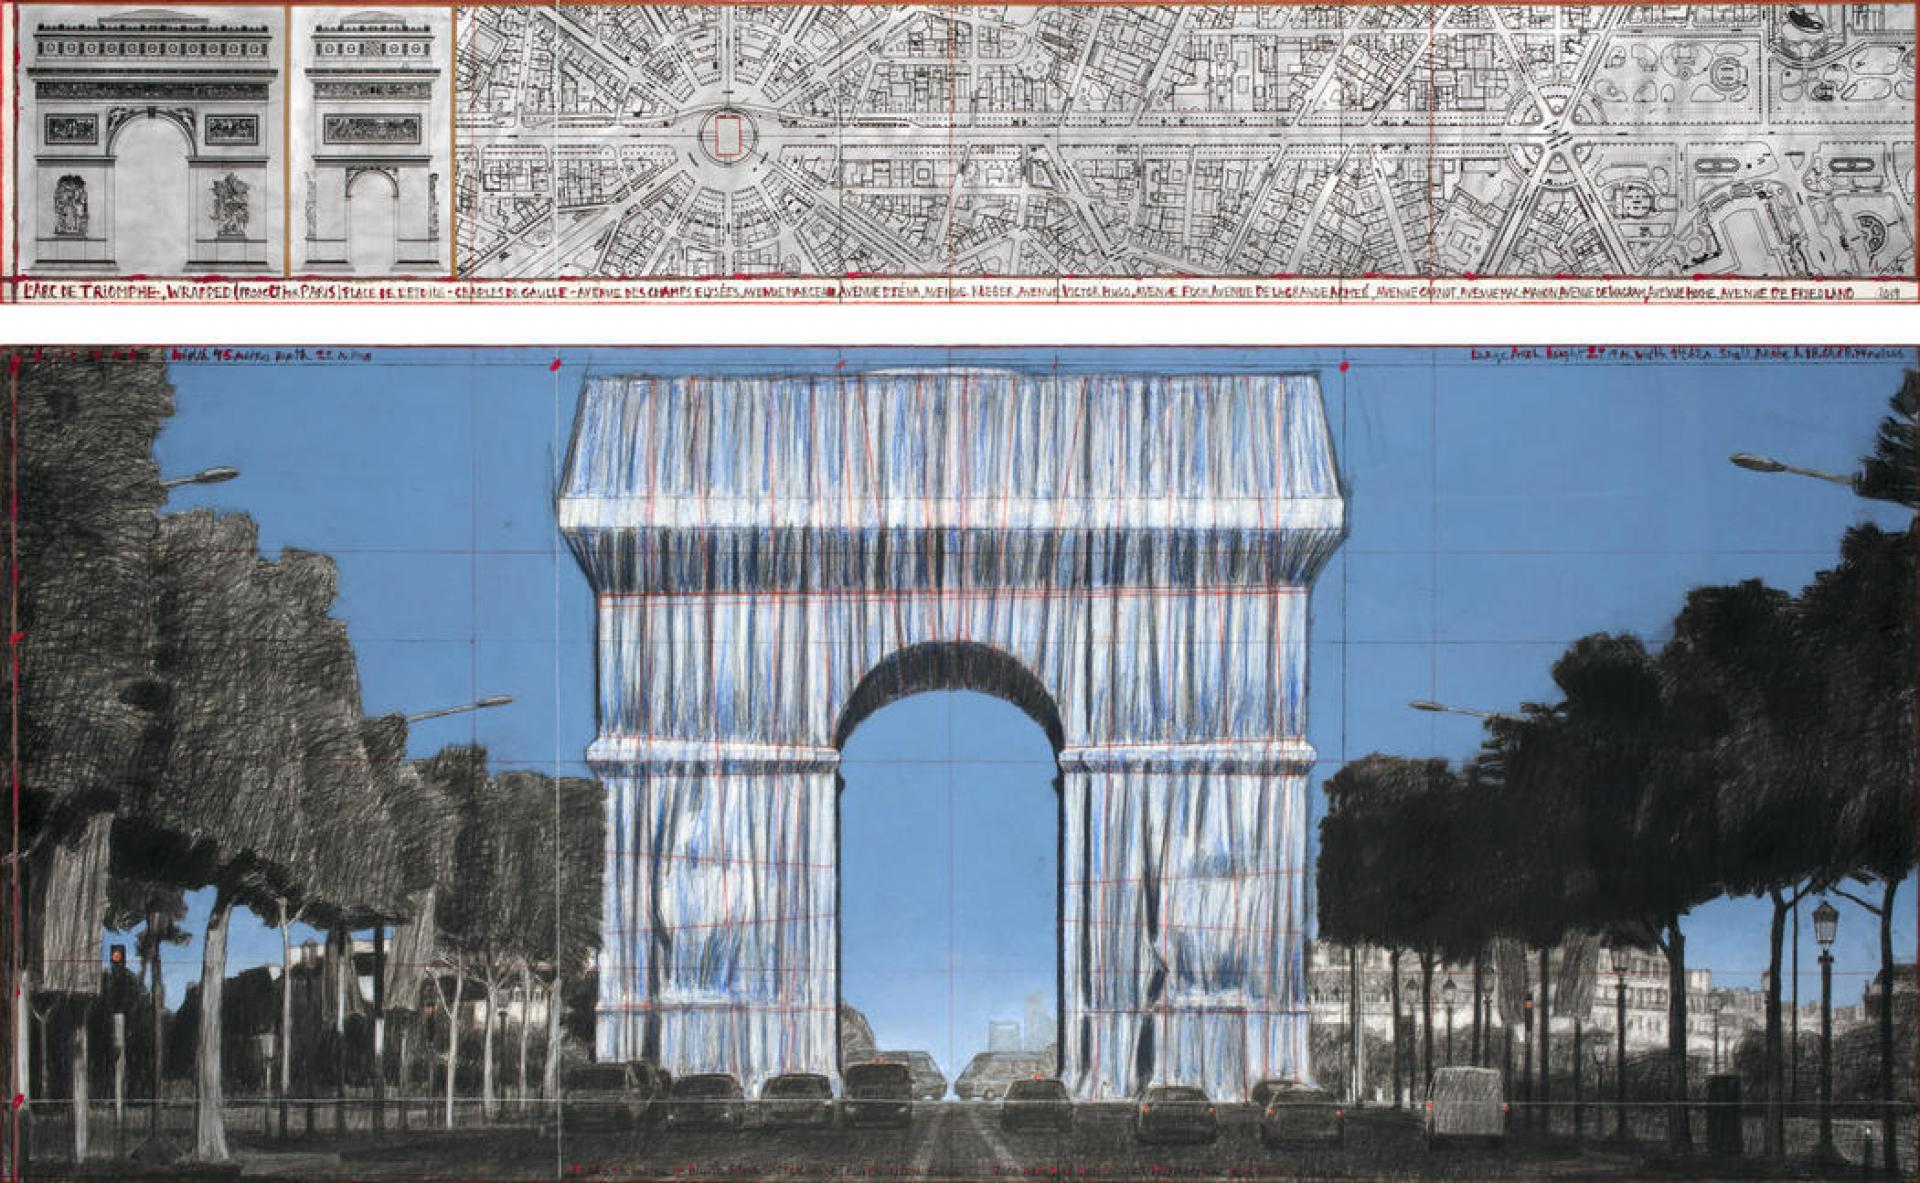 L'Arc de Triomphe, Wrapped (Project for Paris), Drawing 2019 in two parts, Ref. # 9 | Photo André Grossmann © 2019 Christo